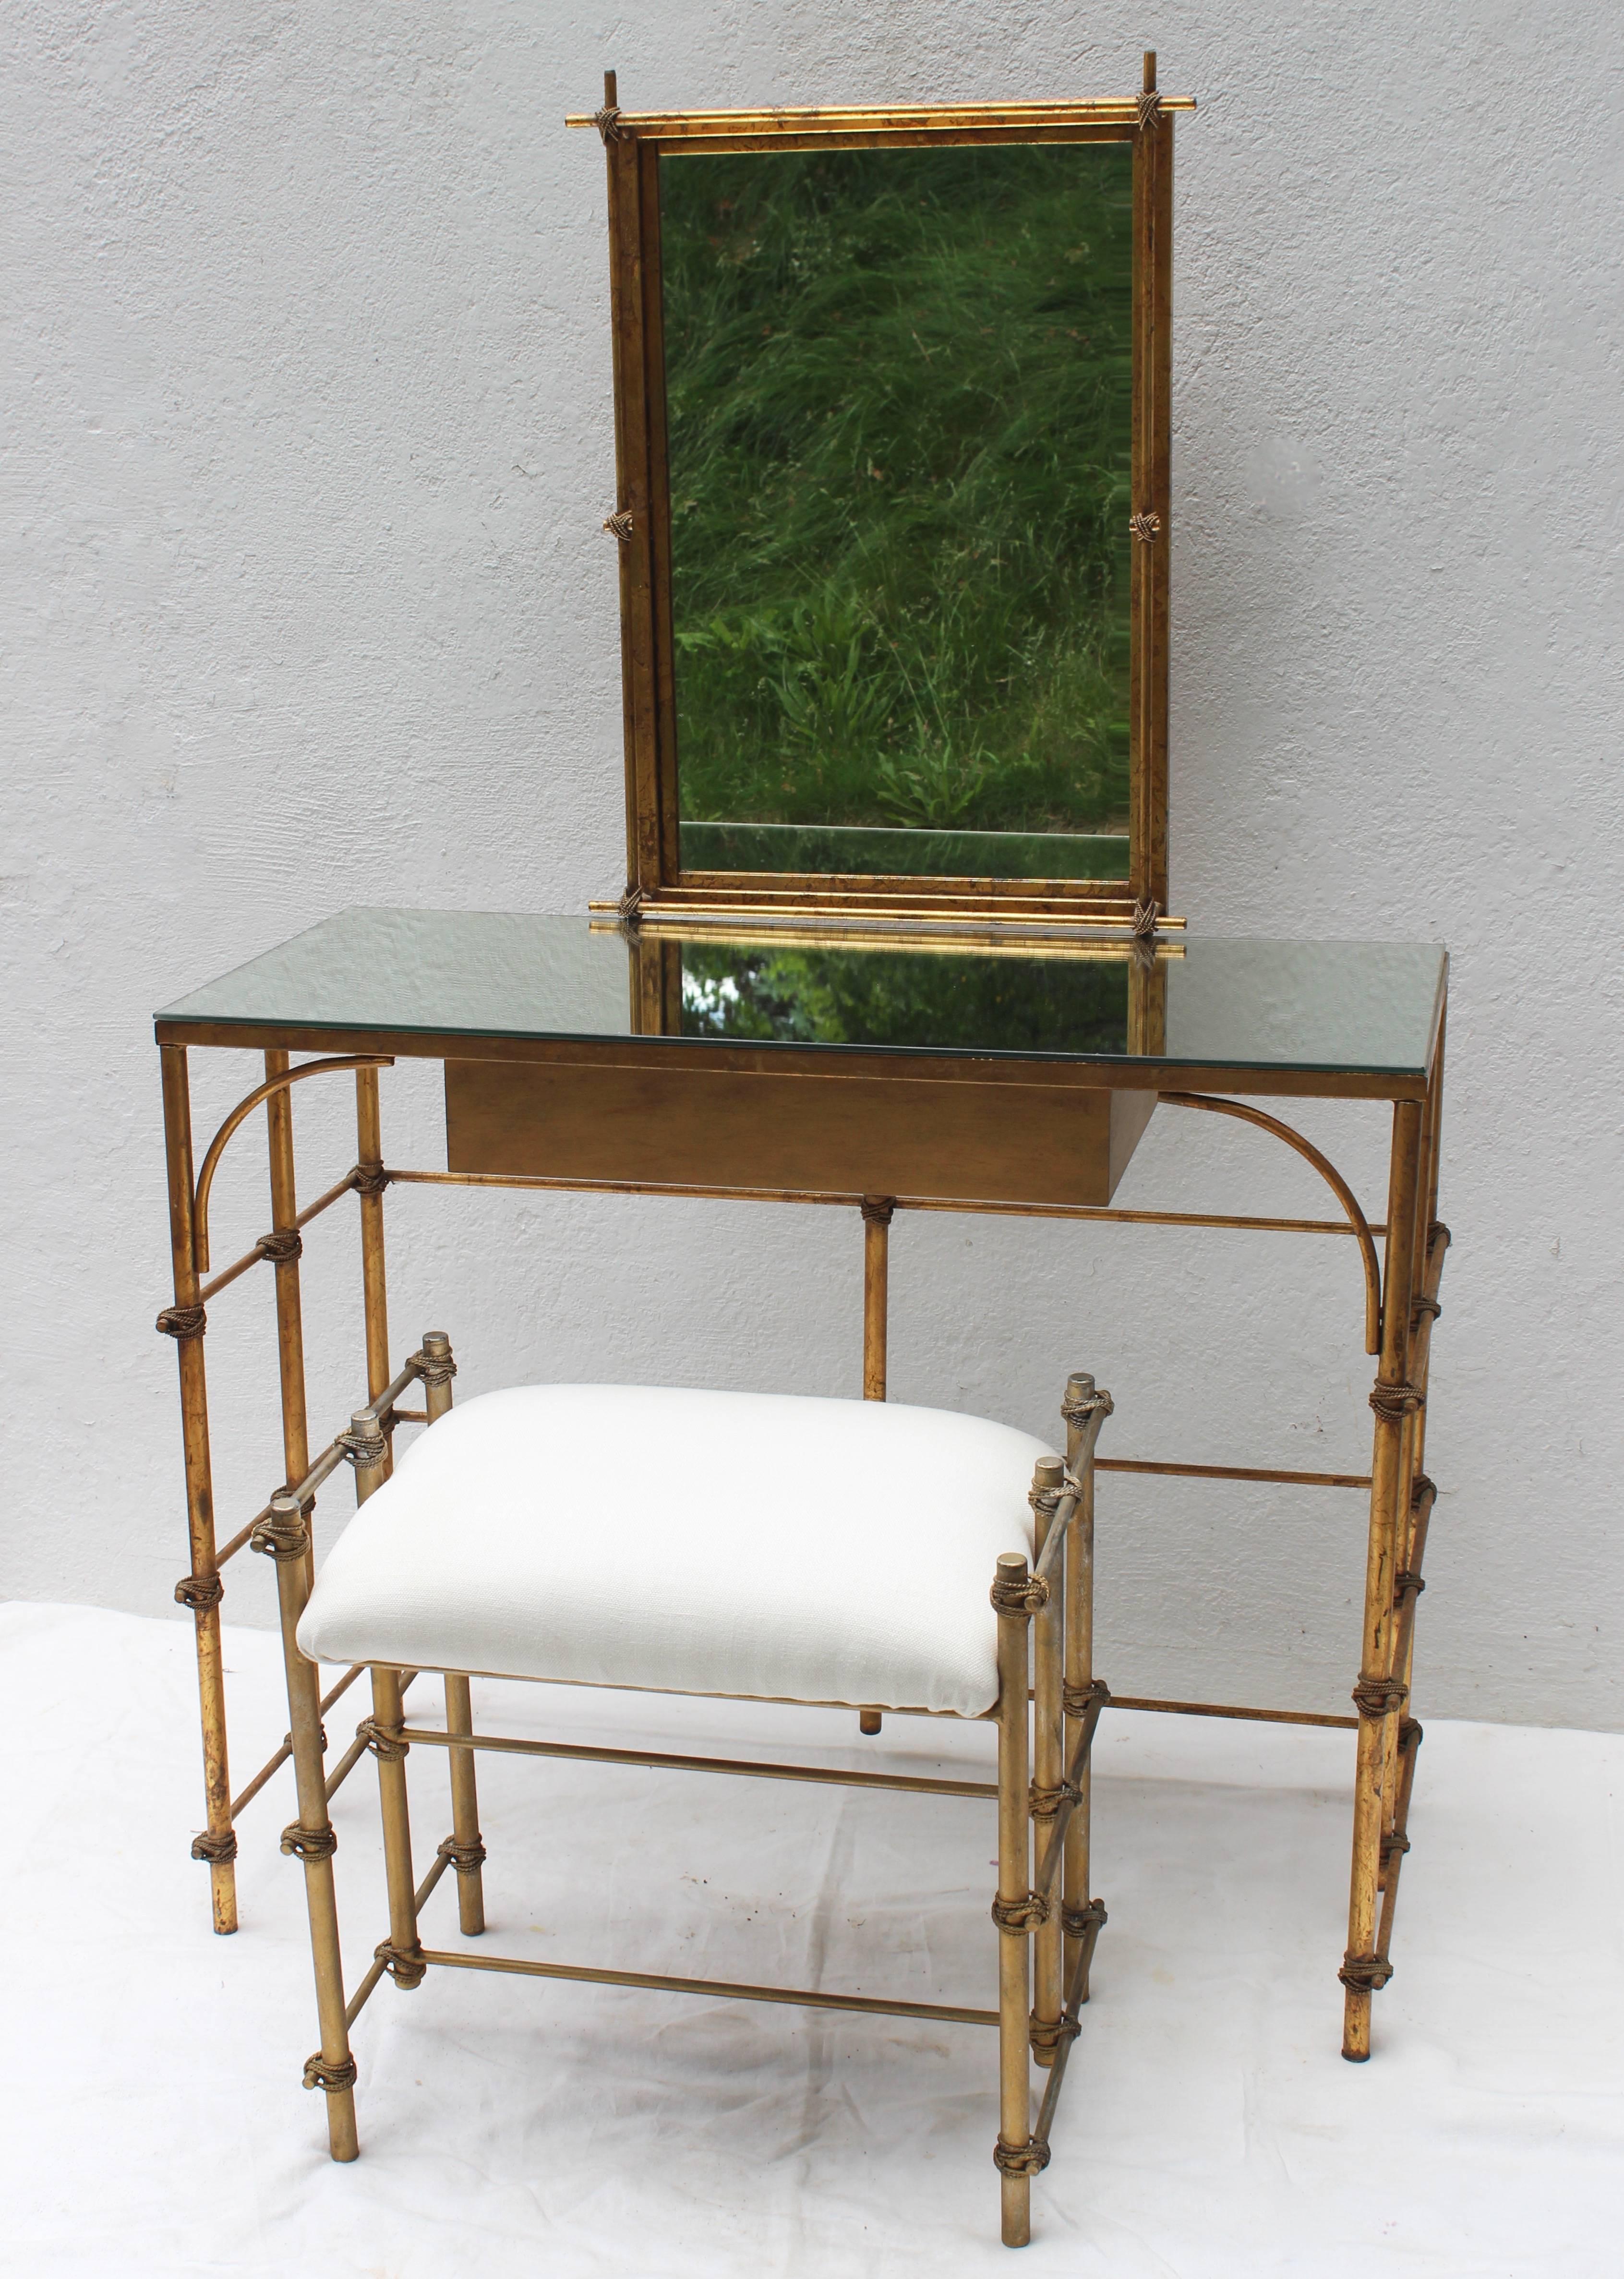 Gilt-metal Brutalist style mirrored table with matching stool and mirror... Make up table/ dressing table...
Table: 29.5